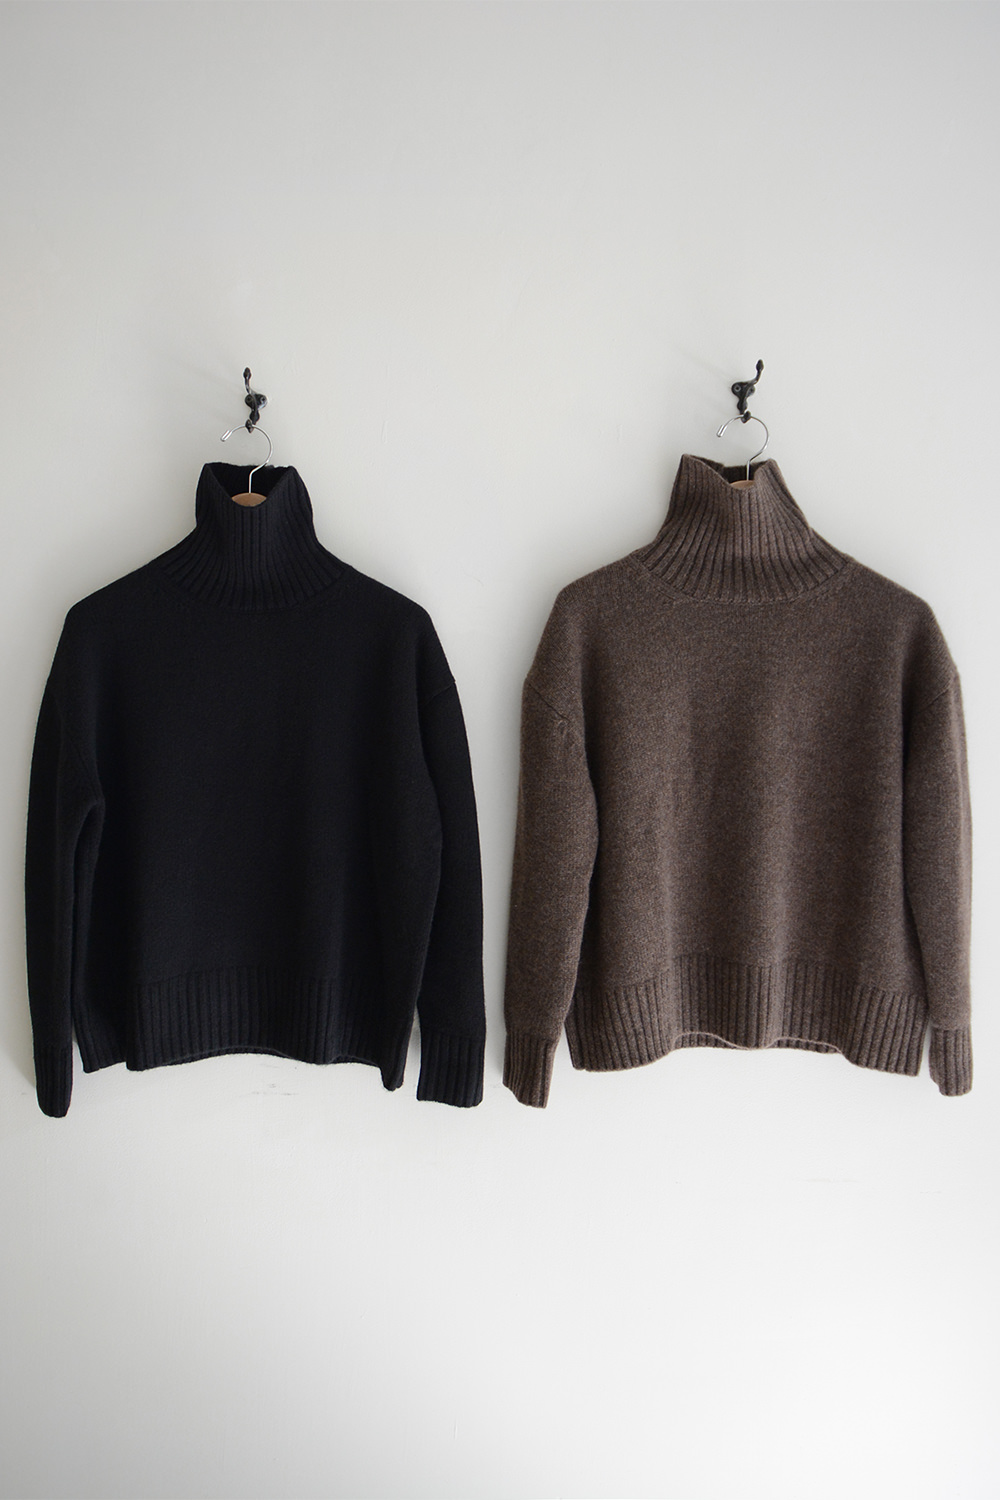 MAKIE Cashmere Turtle Neck Sweaters A Top Picture